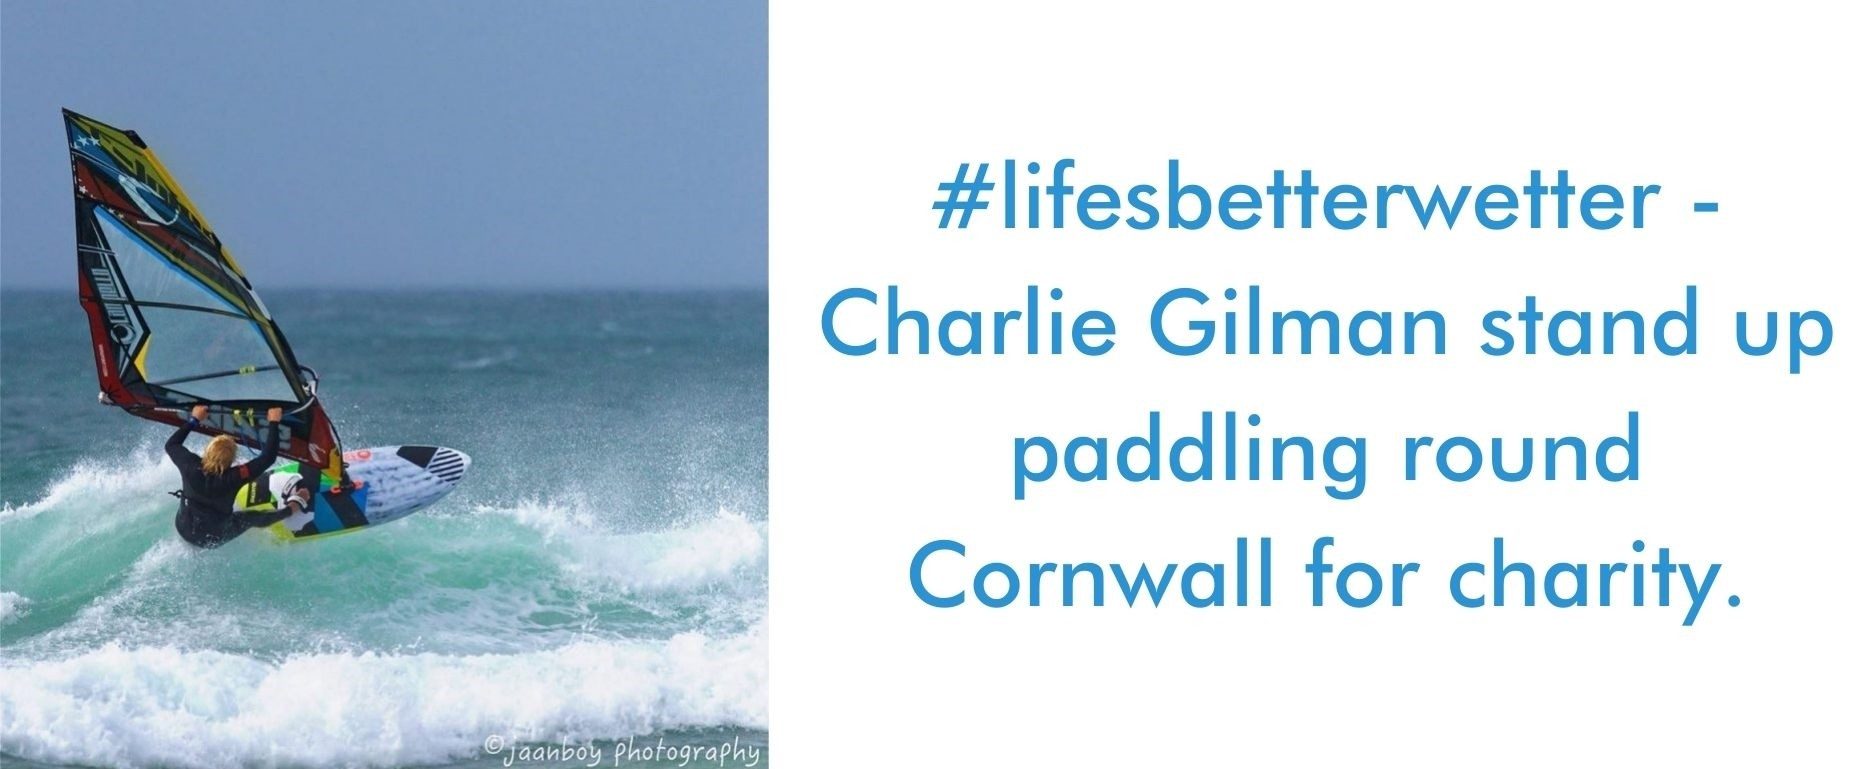 You are currently viewing #lifesbetterwetter – Charlie Gilman stand up paddling round Cornwall for charity.